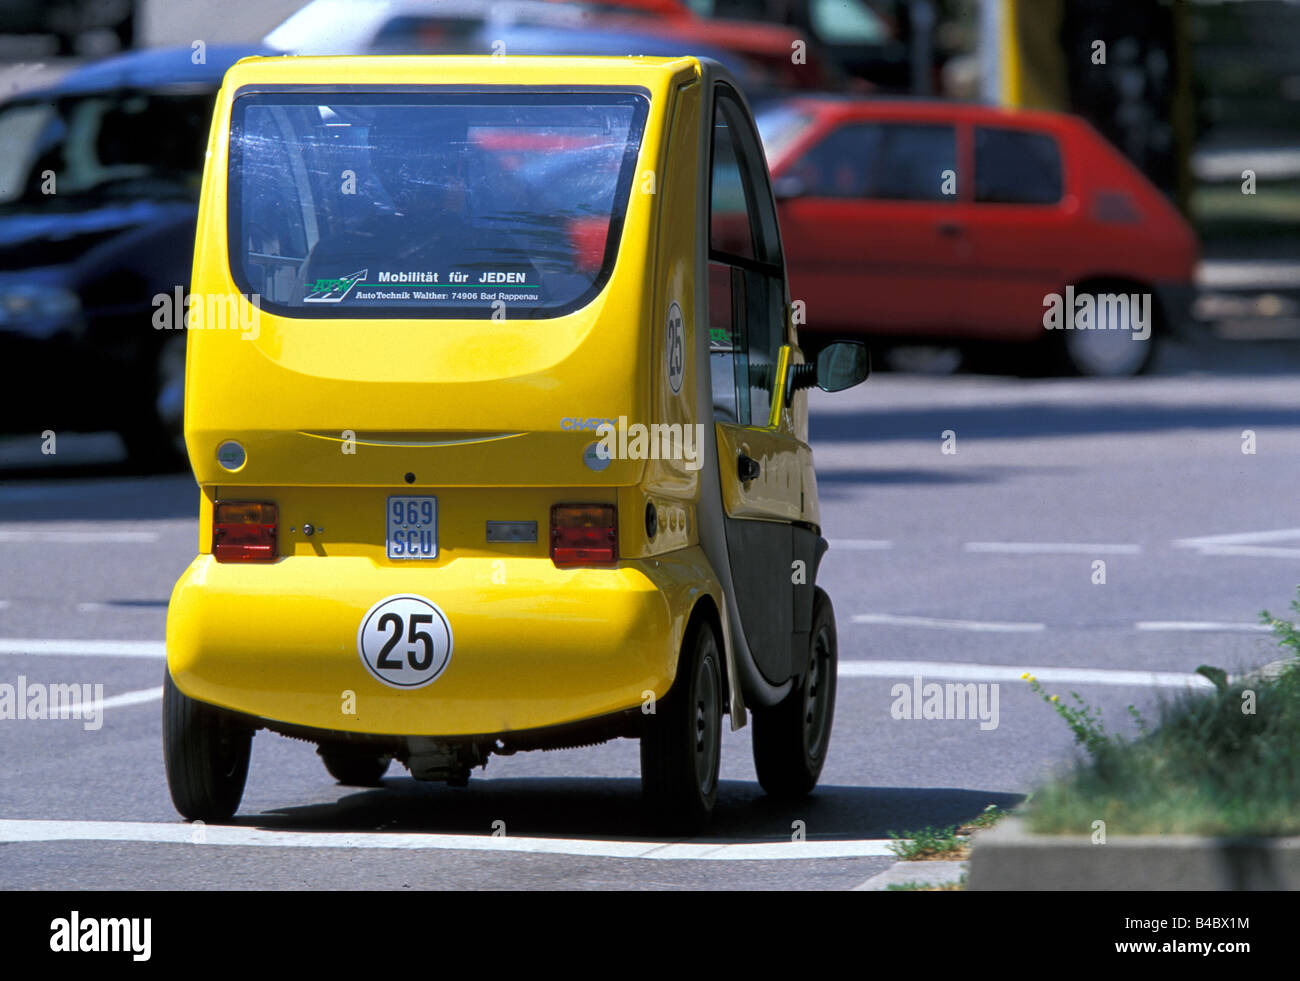 Car, Electric vehicle, Model 'Charly' (Autotechnik Walther), Light approx. Stock Photo